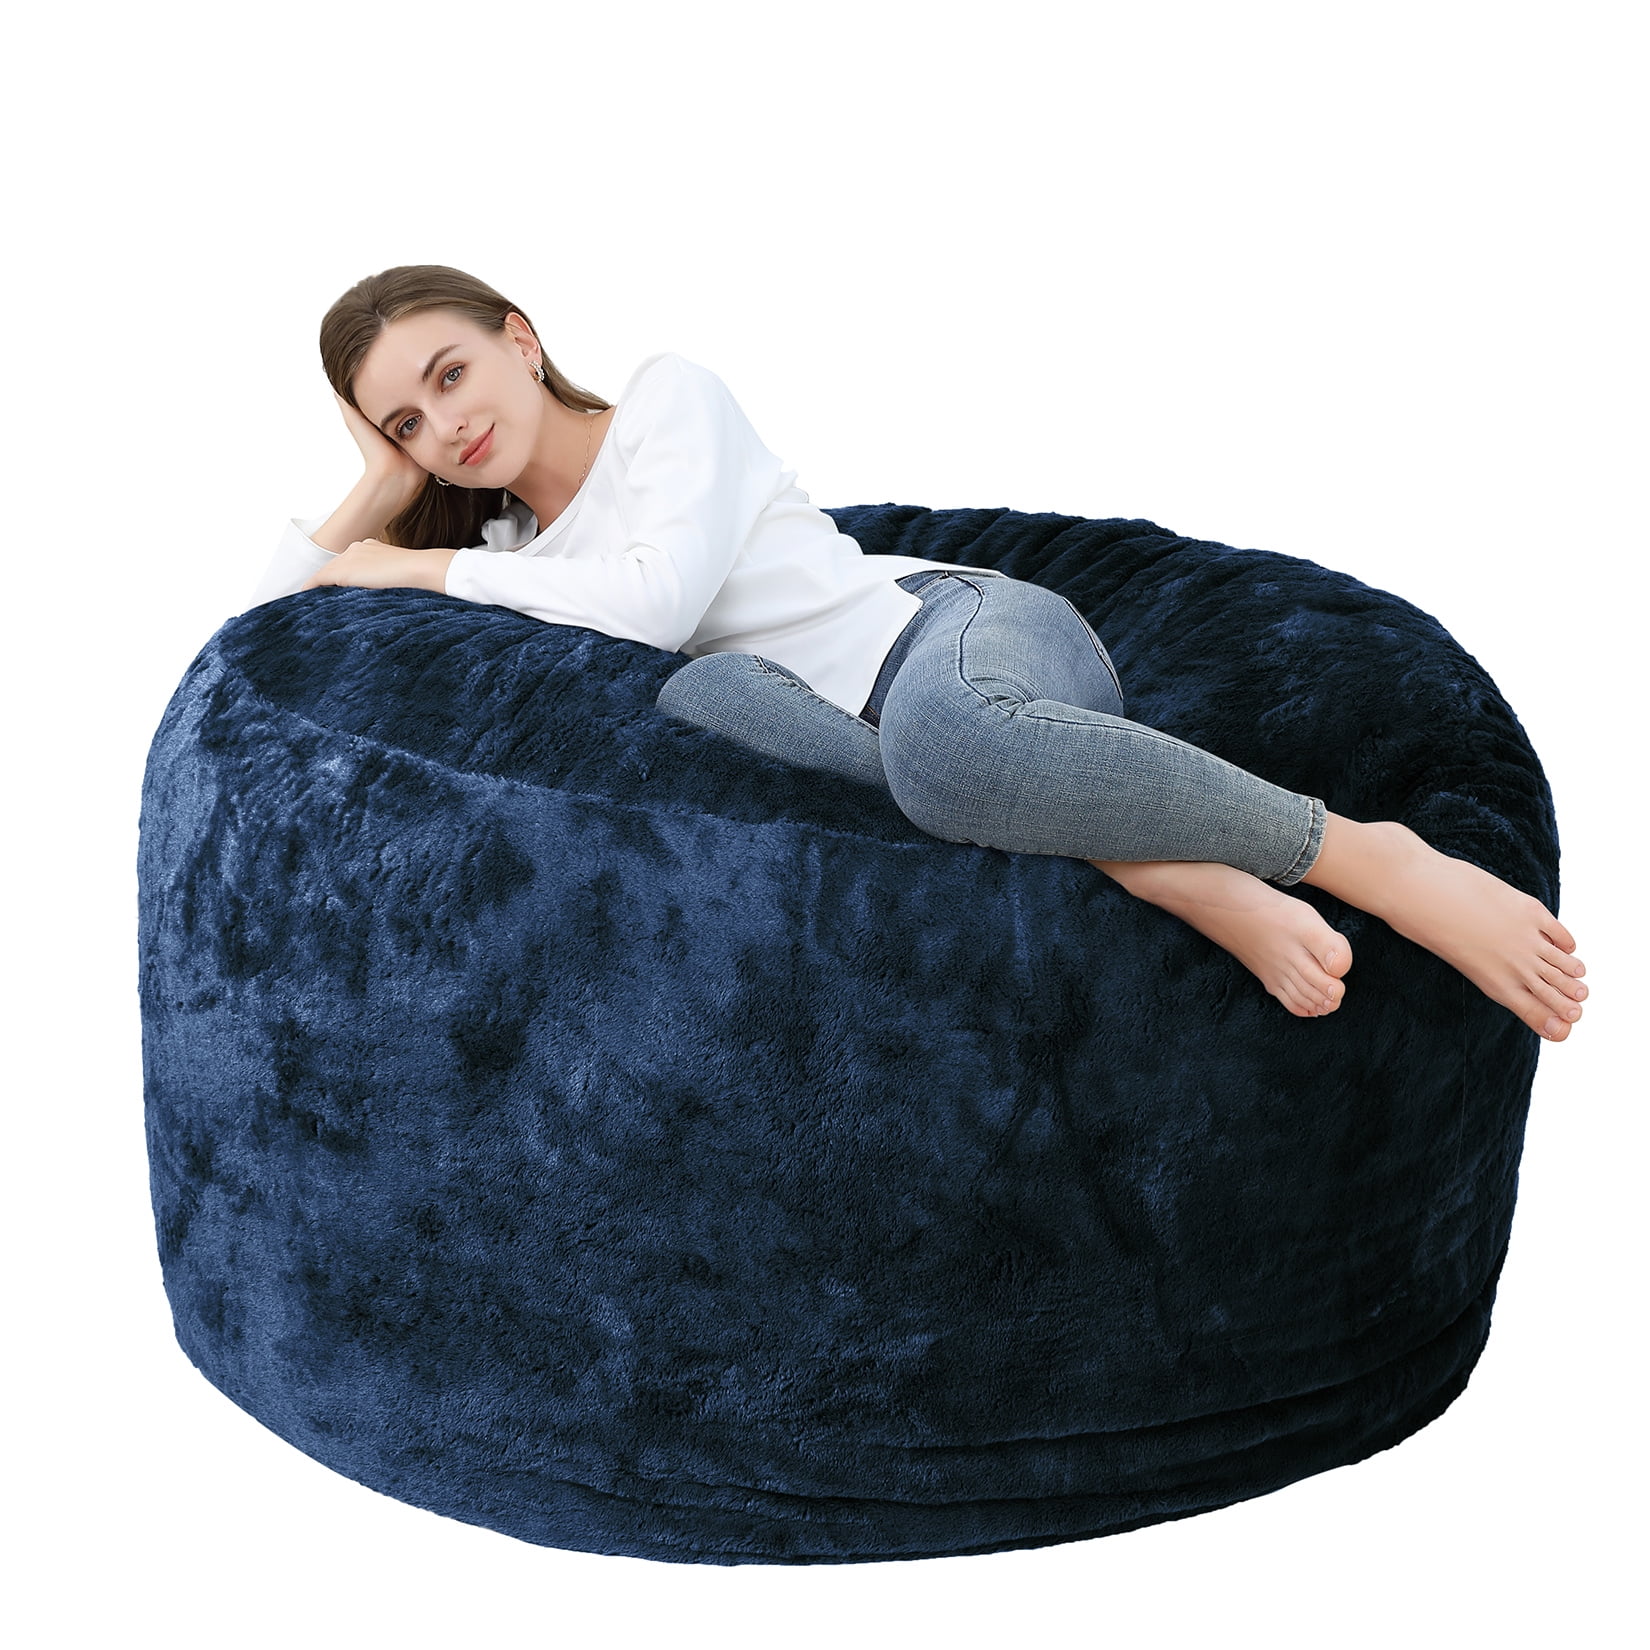 HABUTWAY Bean Bag Chair, Giant Bean Bag Chair with Washable Chenille Cover  Ultra Soft, Convertible Bean Bag from Chair to Mattress, Huge Chenille Bean